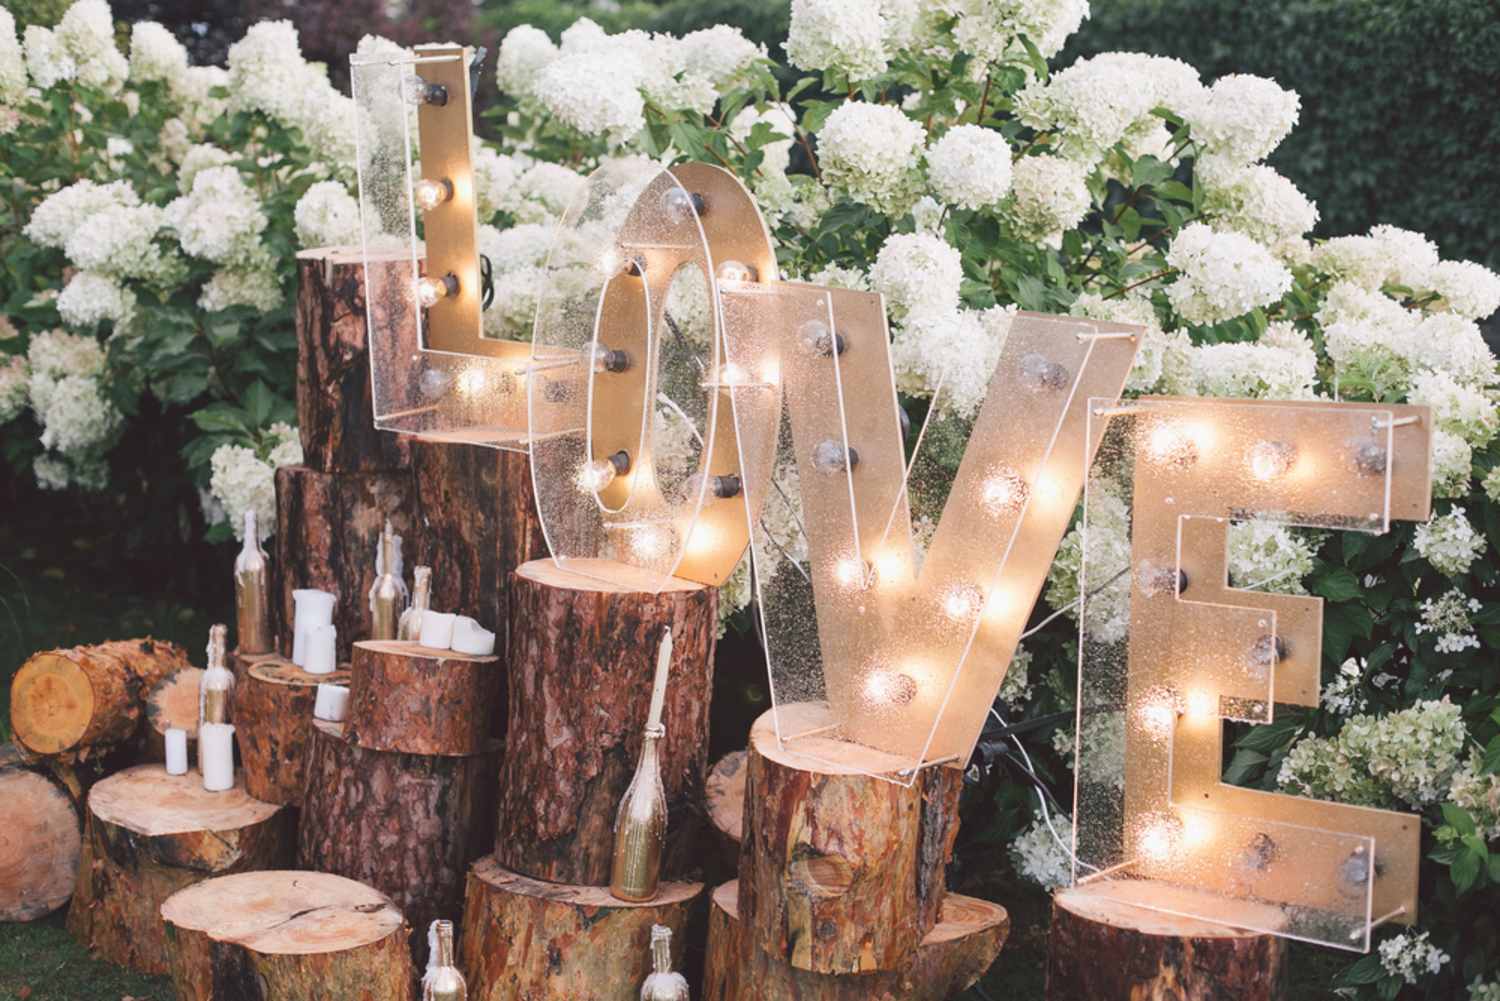 Floral & Light Decoration - Wedding Project Management in Gold Coast, QLD